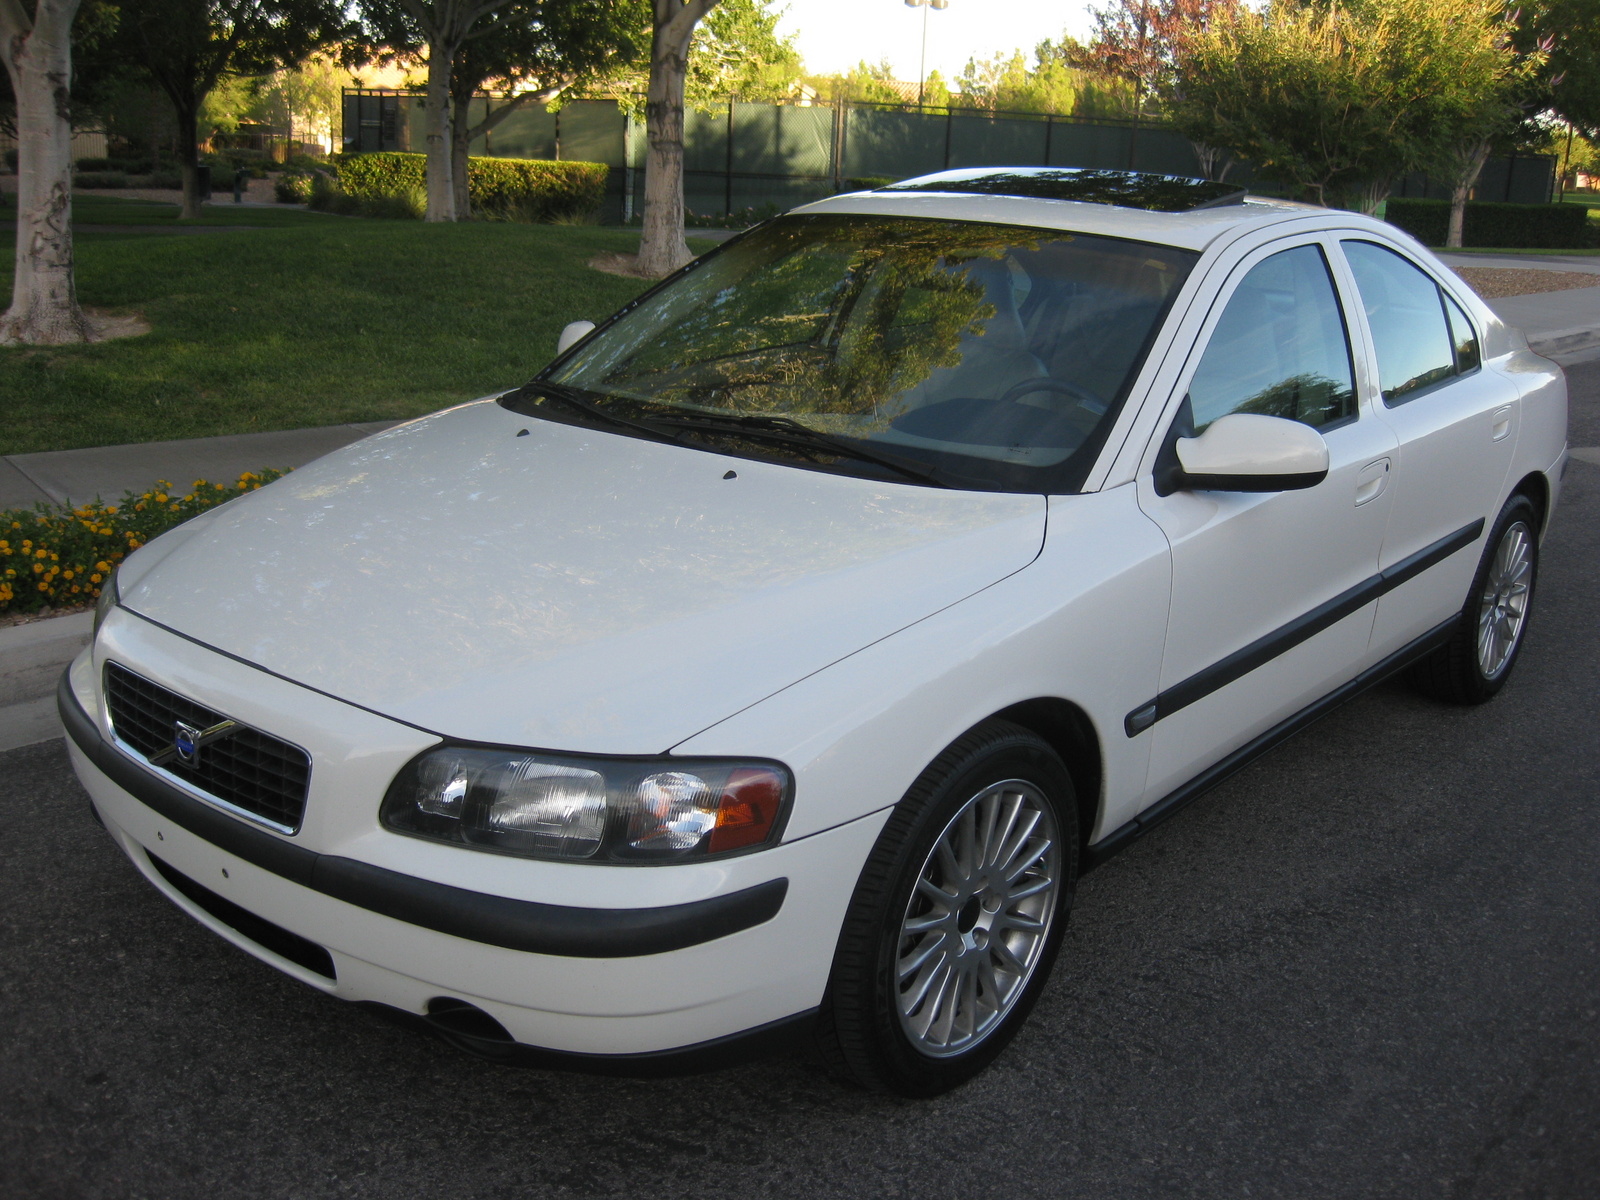 2002 Volvo S60 R related infomation,specifications WeiLi